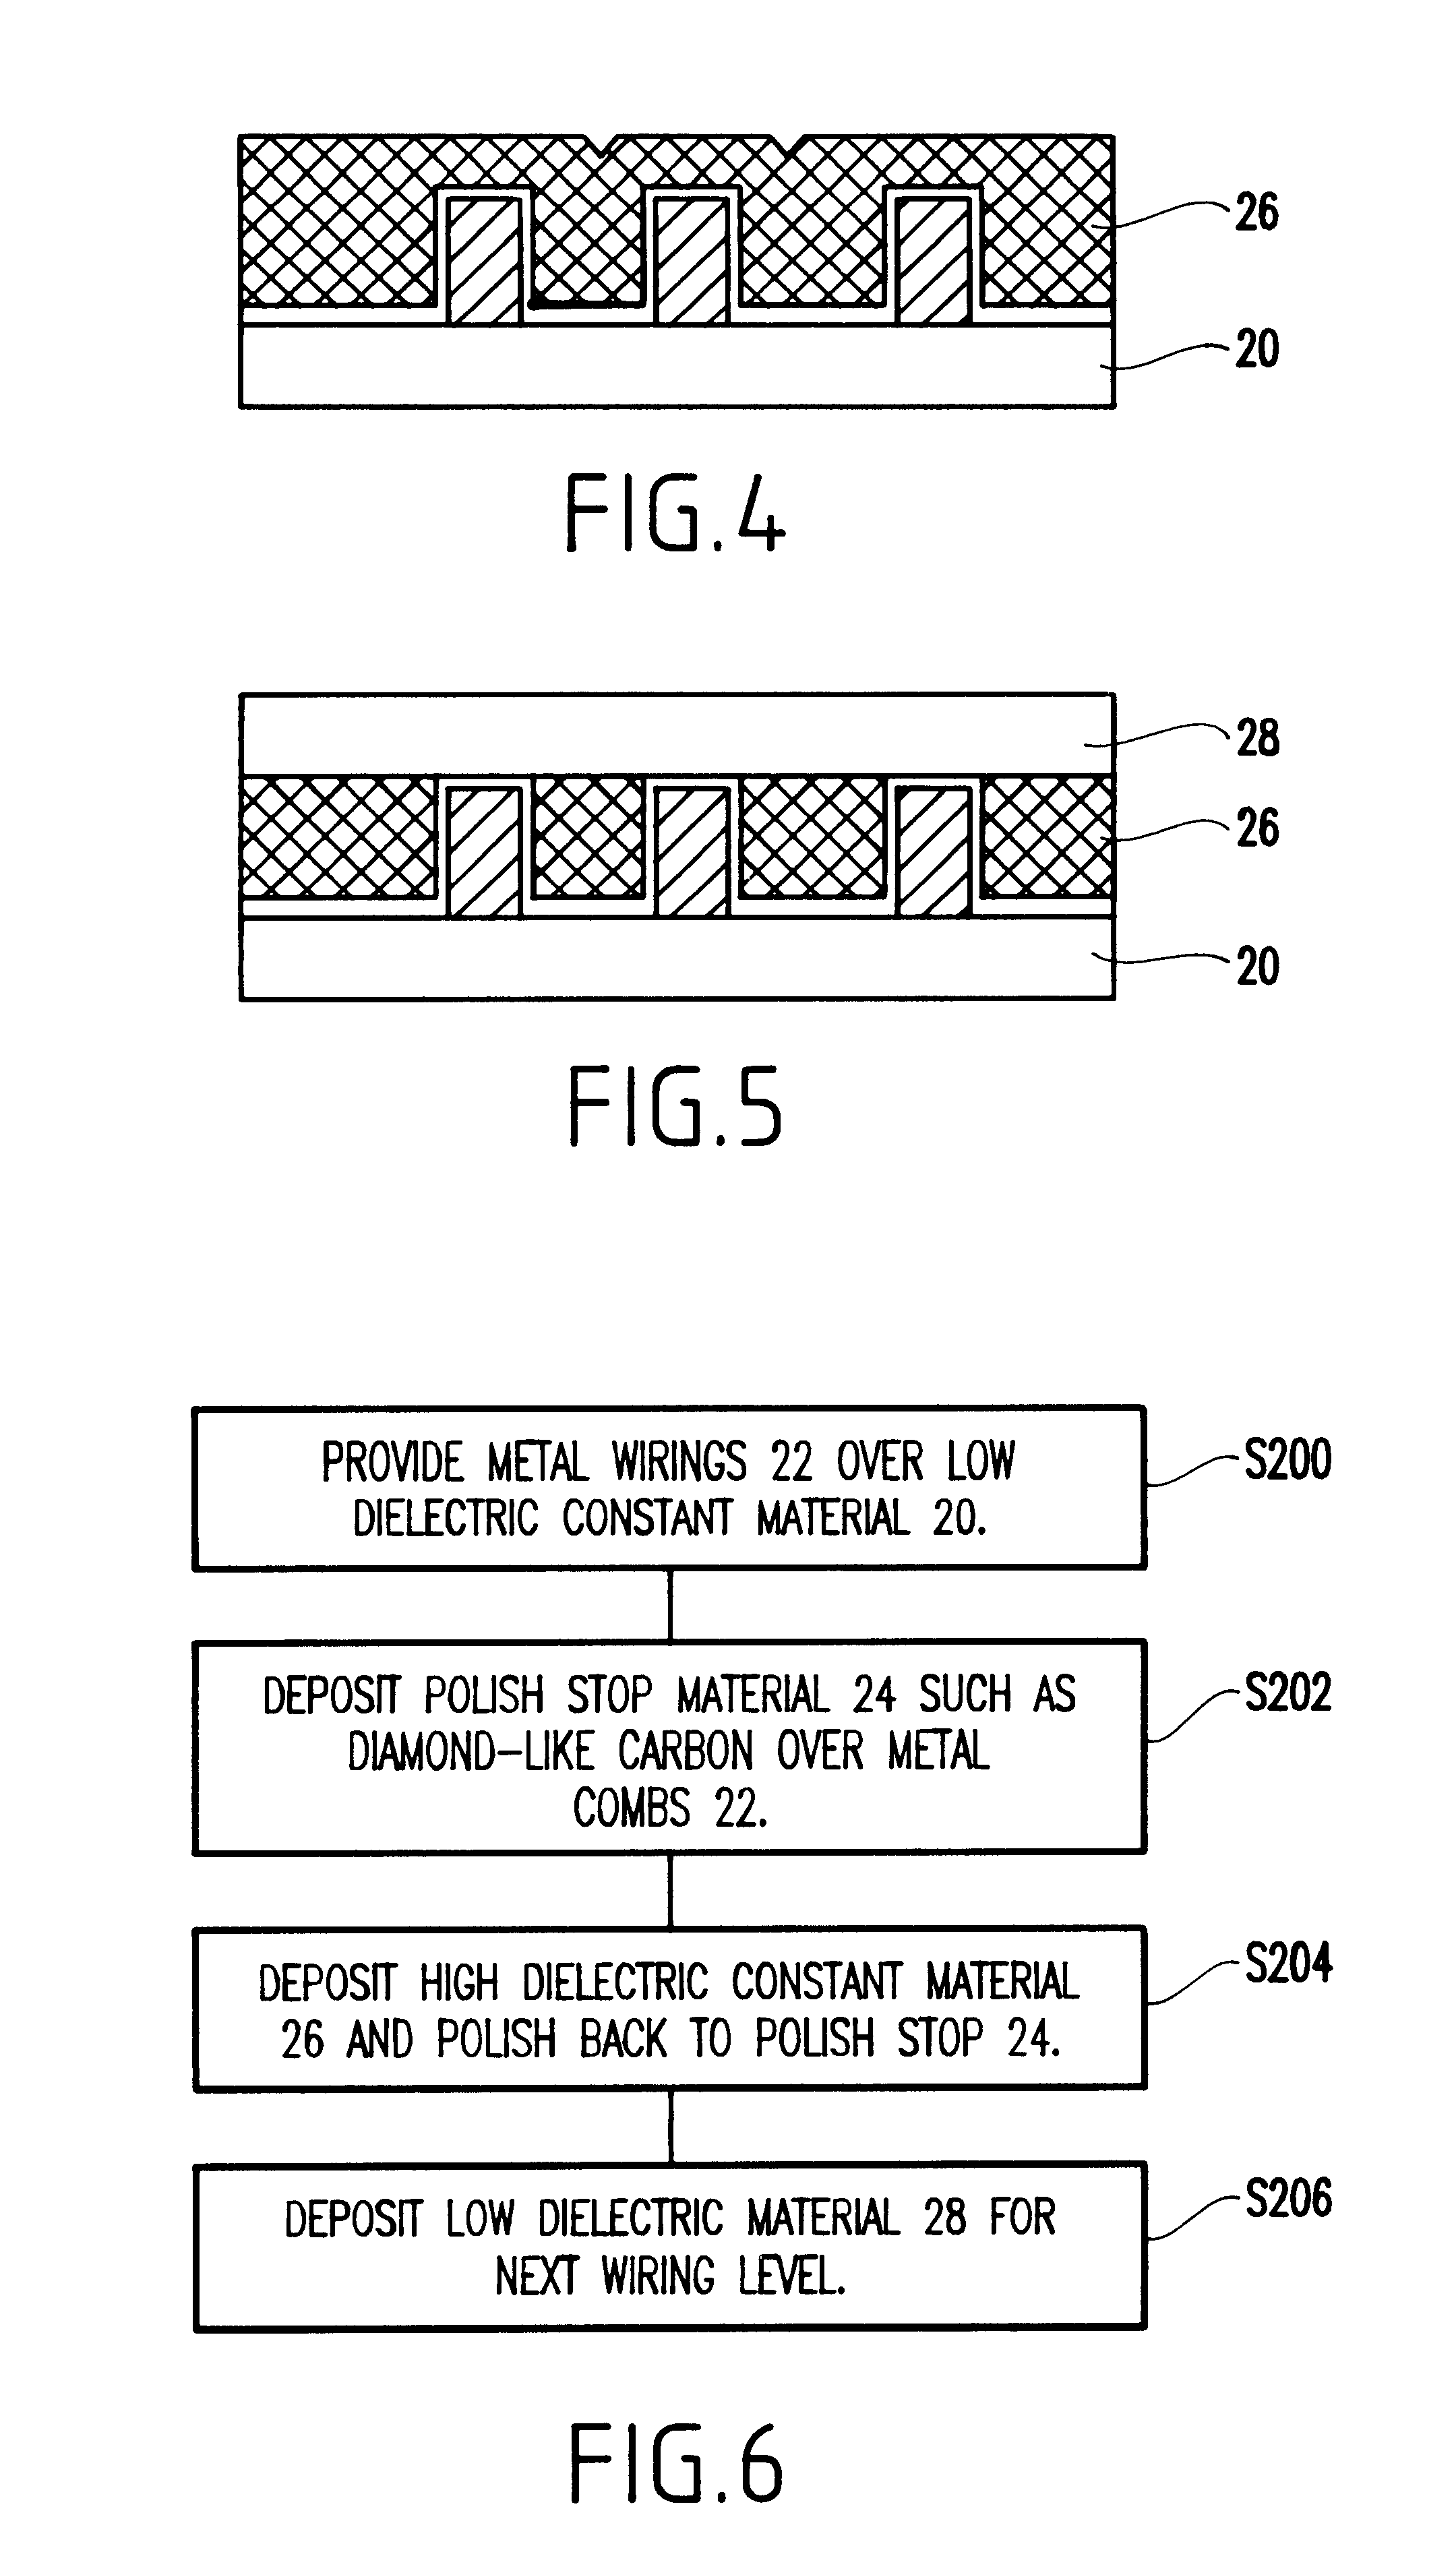 Intralevel decoupling capacitor, method of manufacture and testing circuit of the same